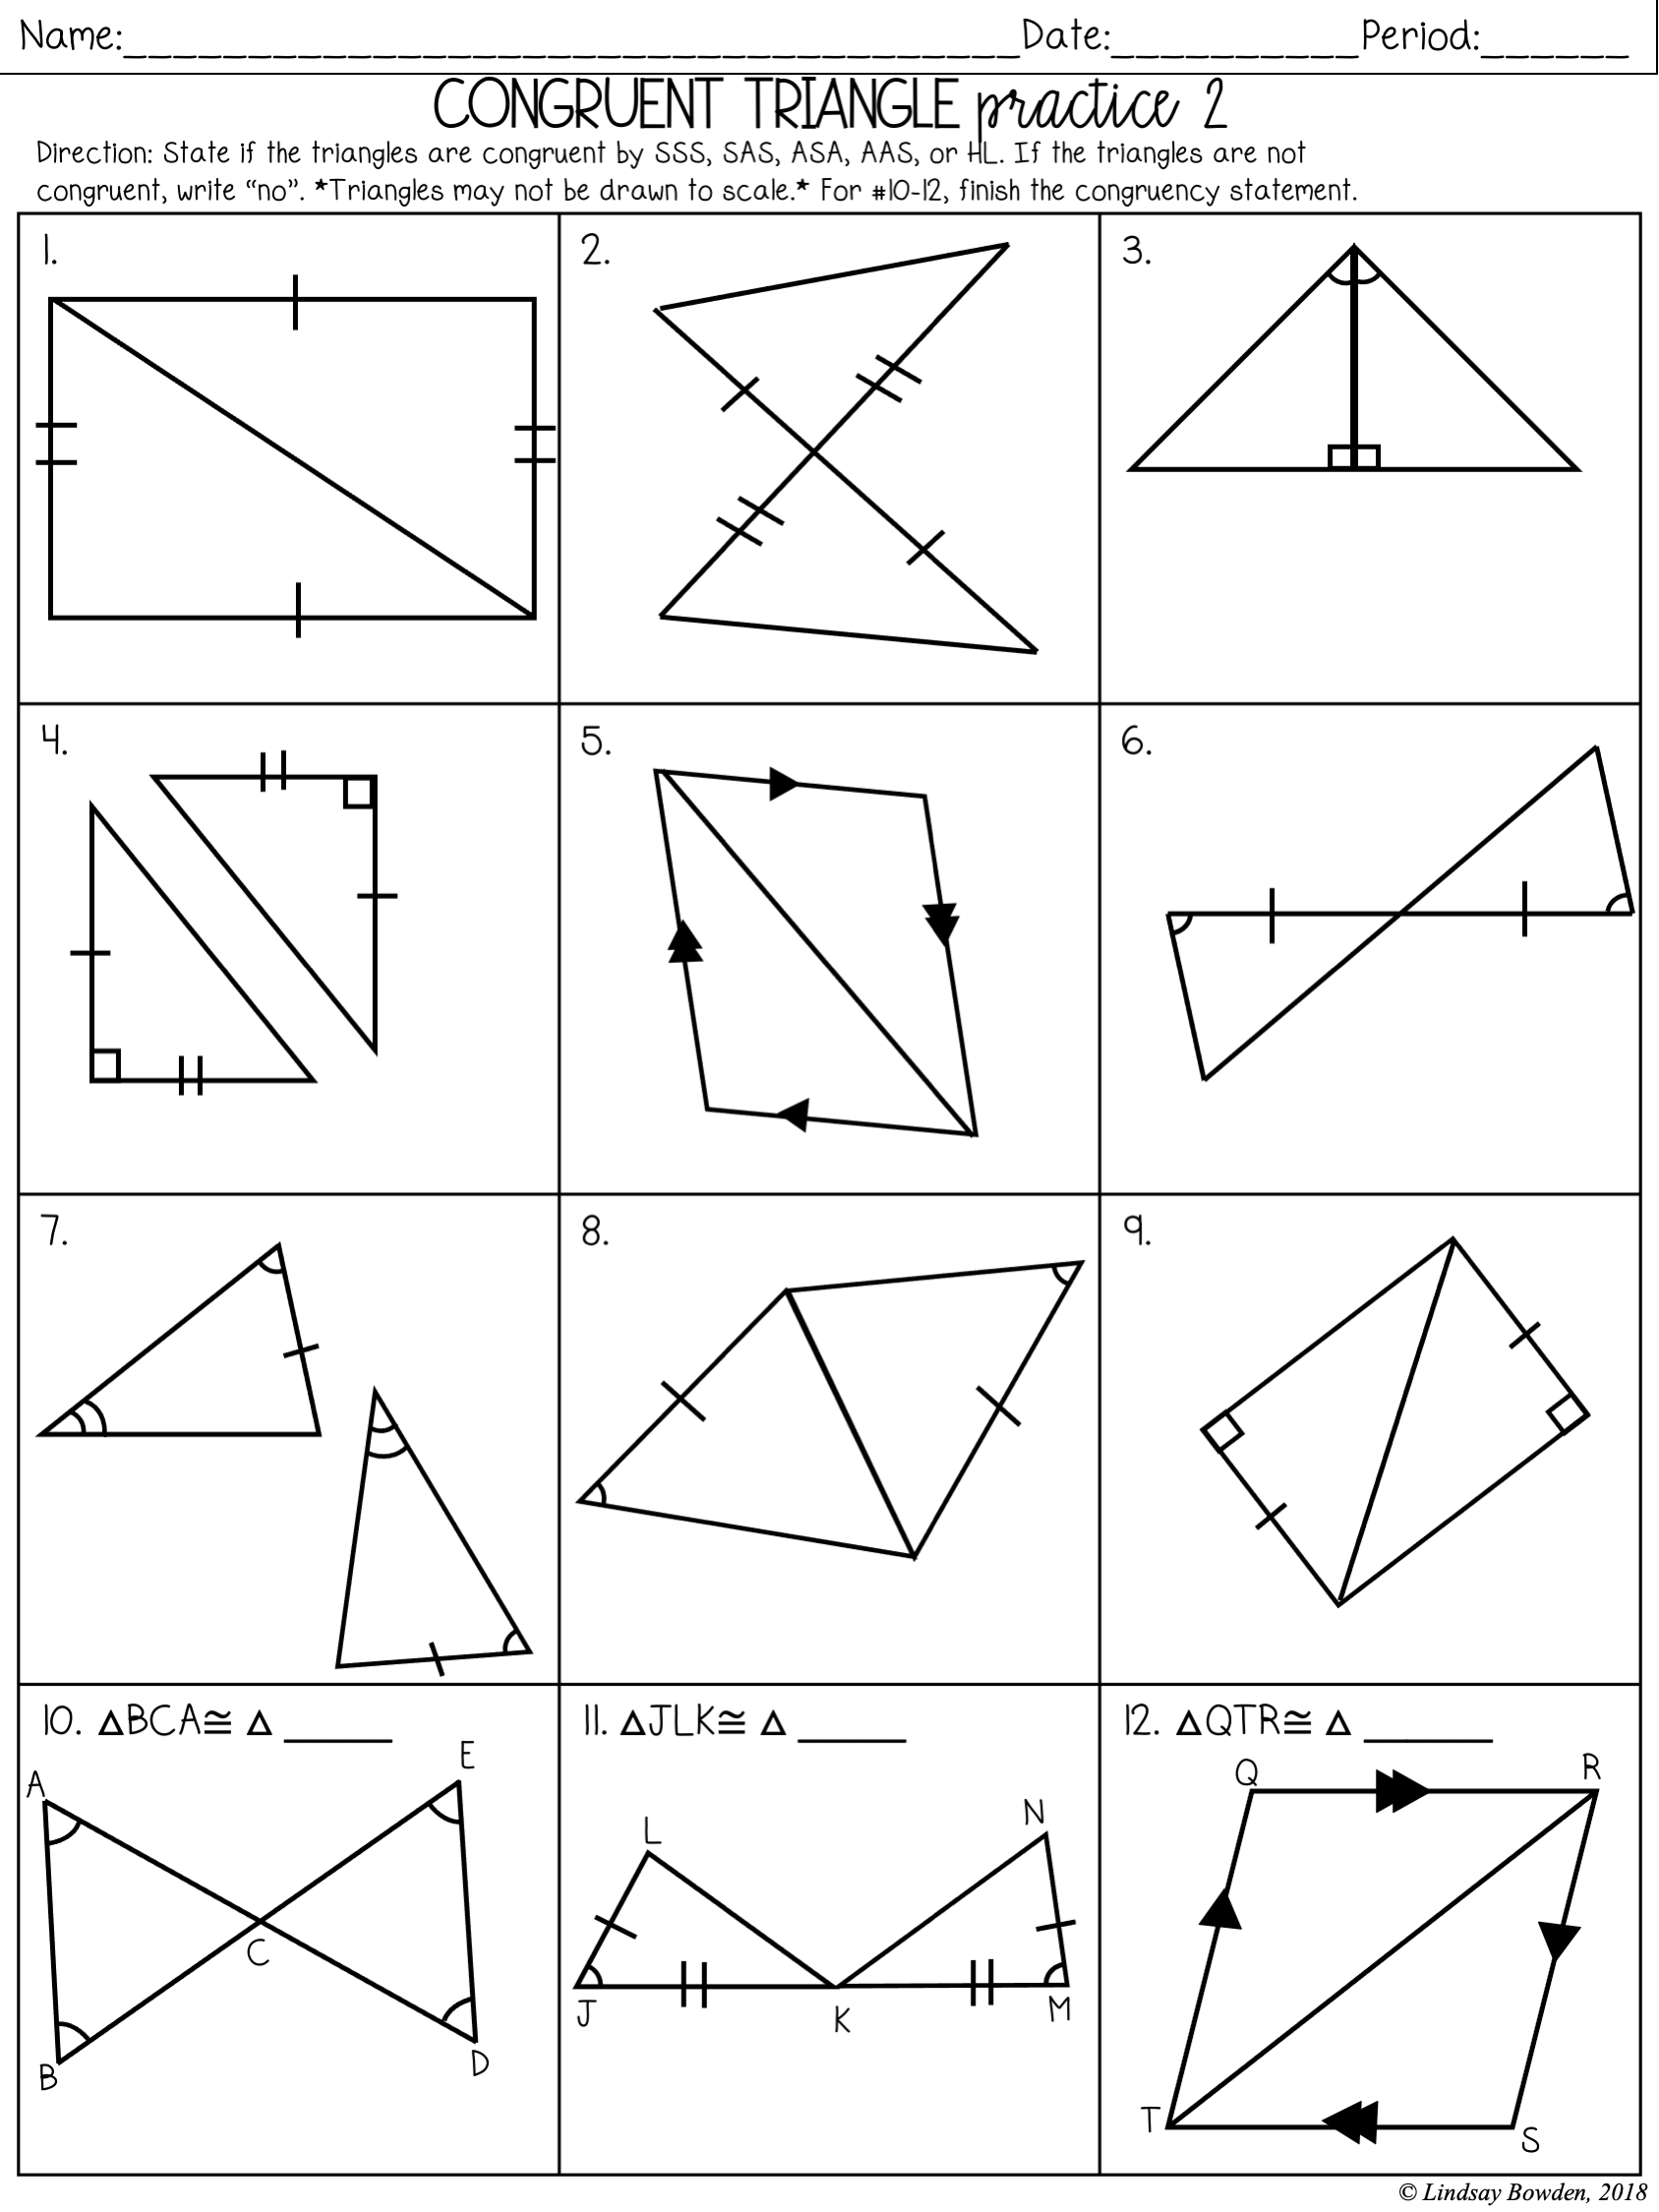 Congruent Triangles Notes and Worksheets - Lindsay Bowden With Triangle Congruence Practice Worksheet